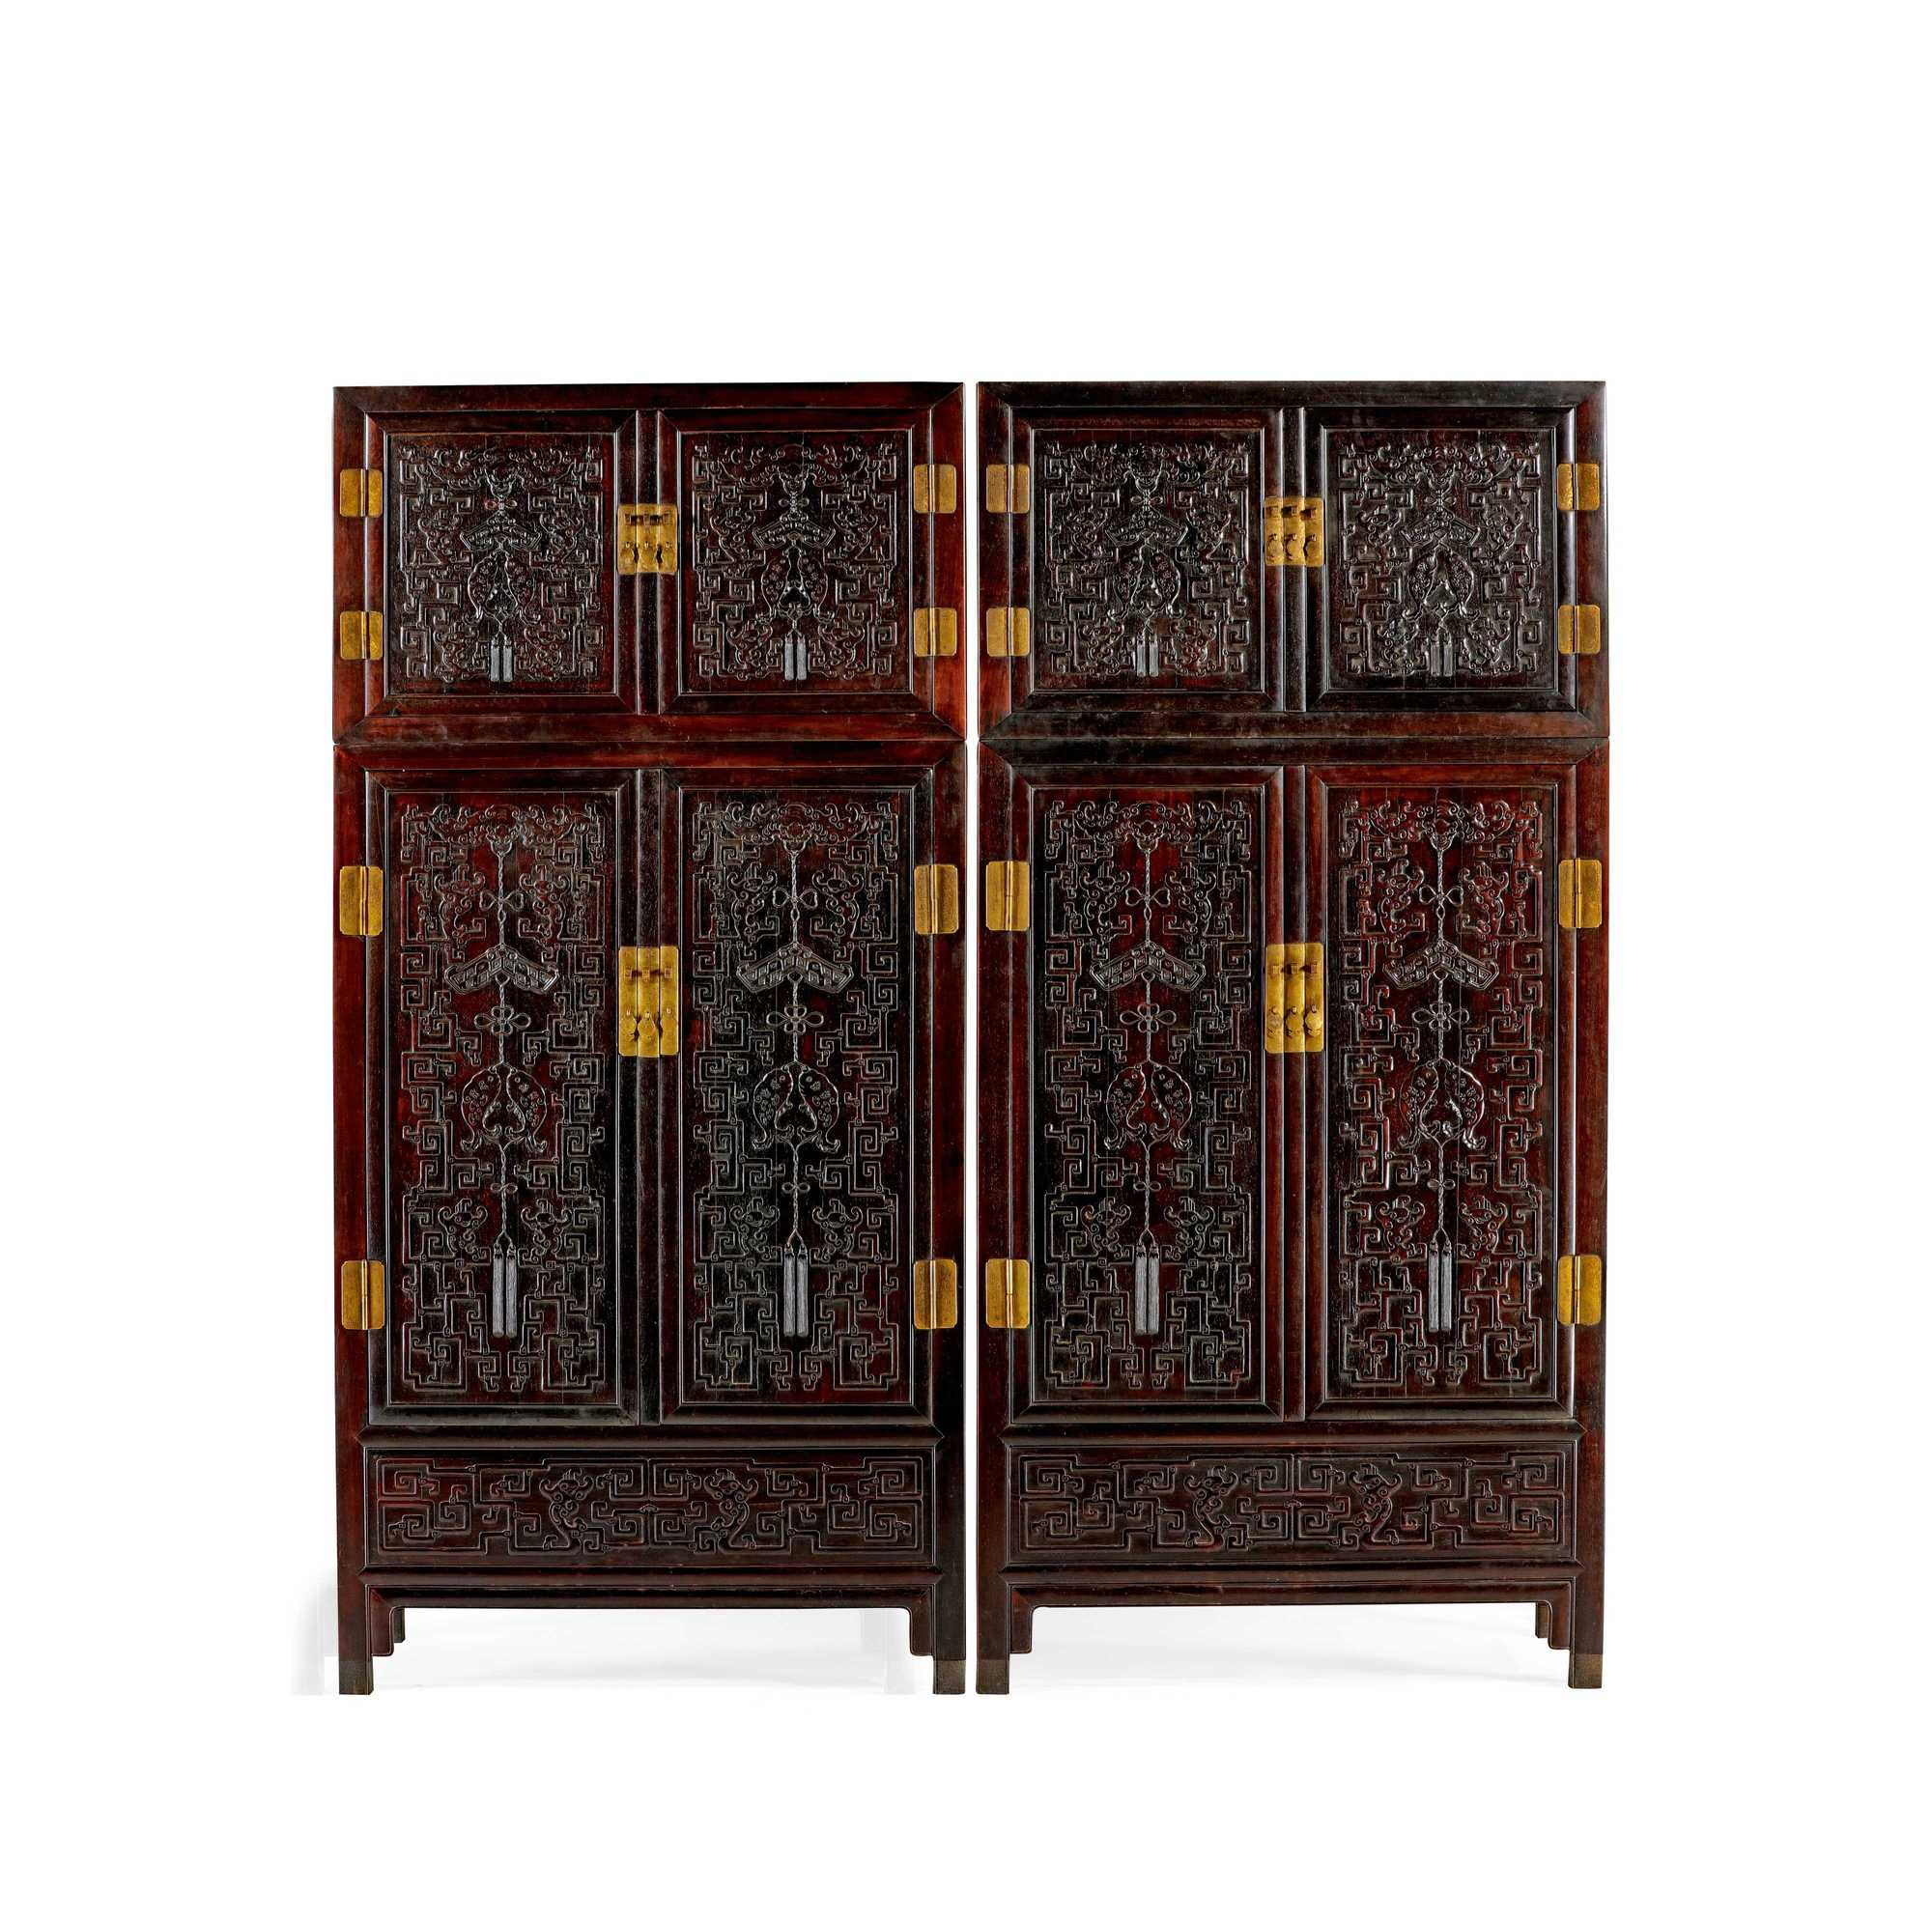 RED SANDALWOOD CABINET WITH TOP SHELVES CARVED IN HIGH RELIEF OF AUSPICIOUSNESS AND PROSPERITY “FU QING, YOU YU” DESIGN